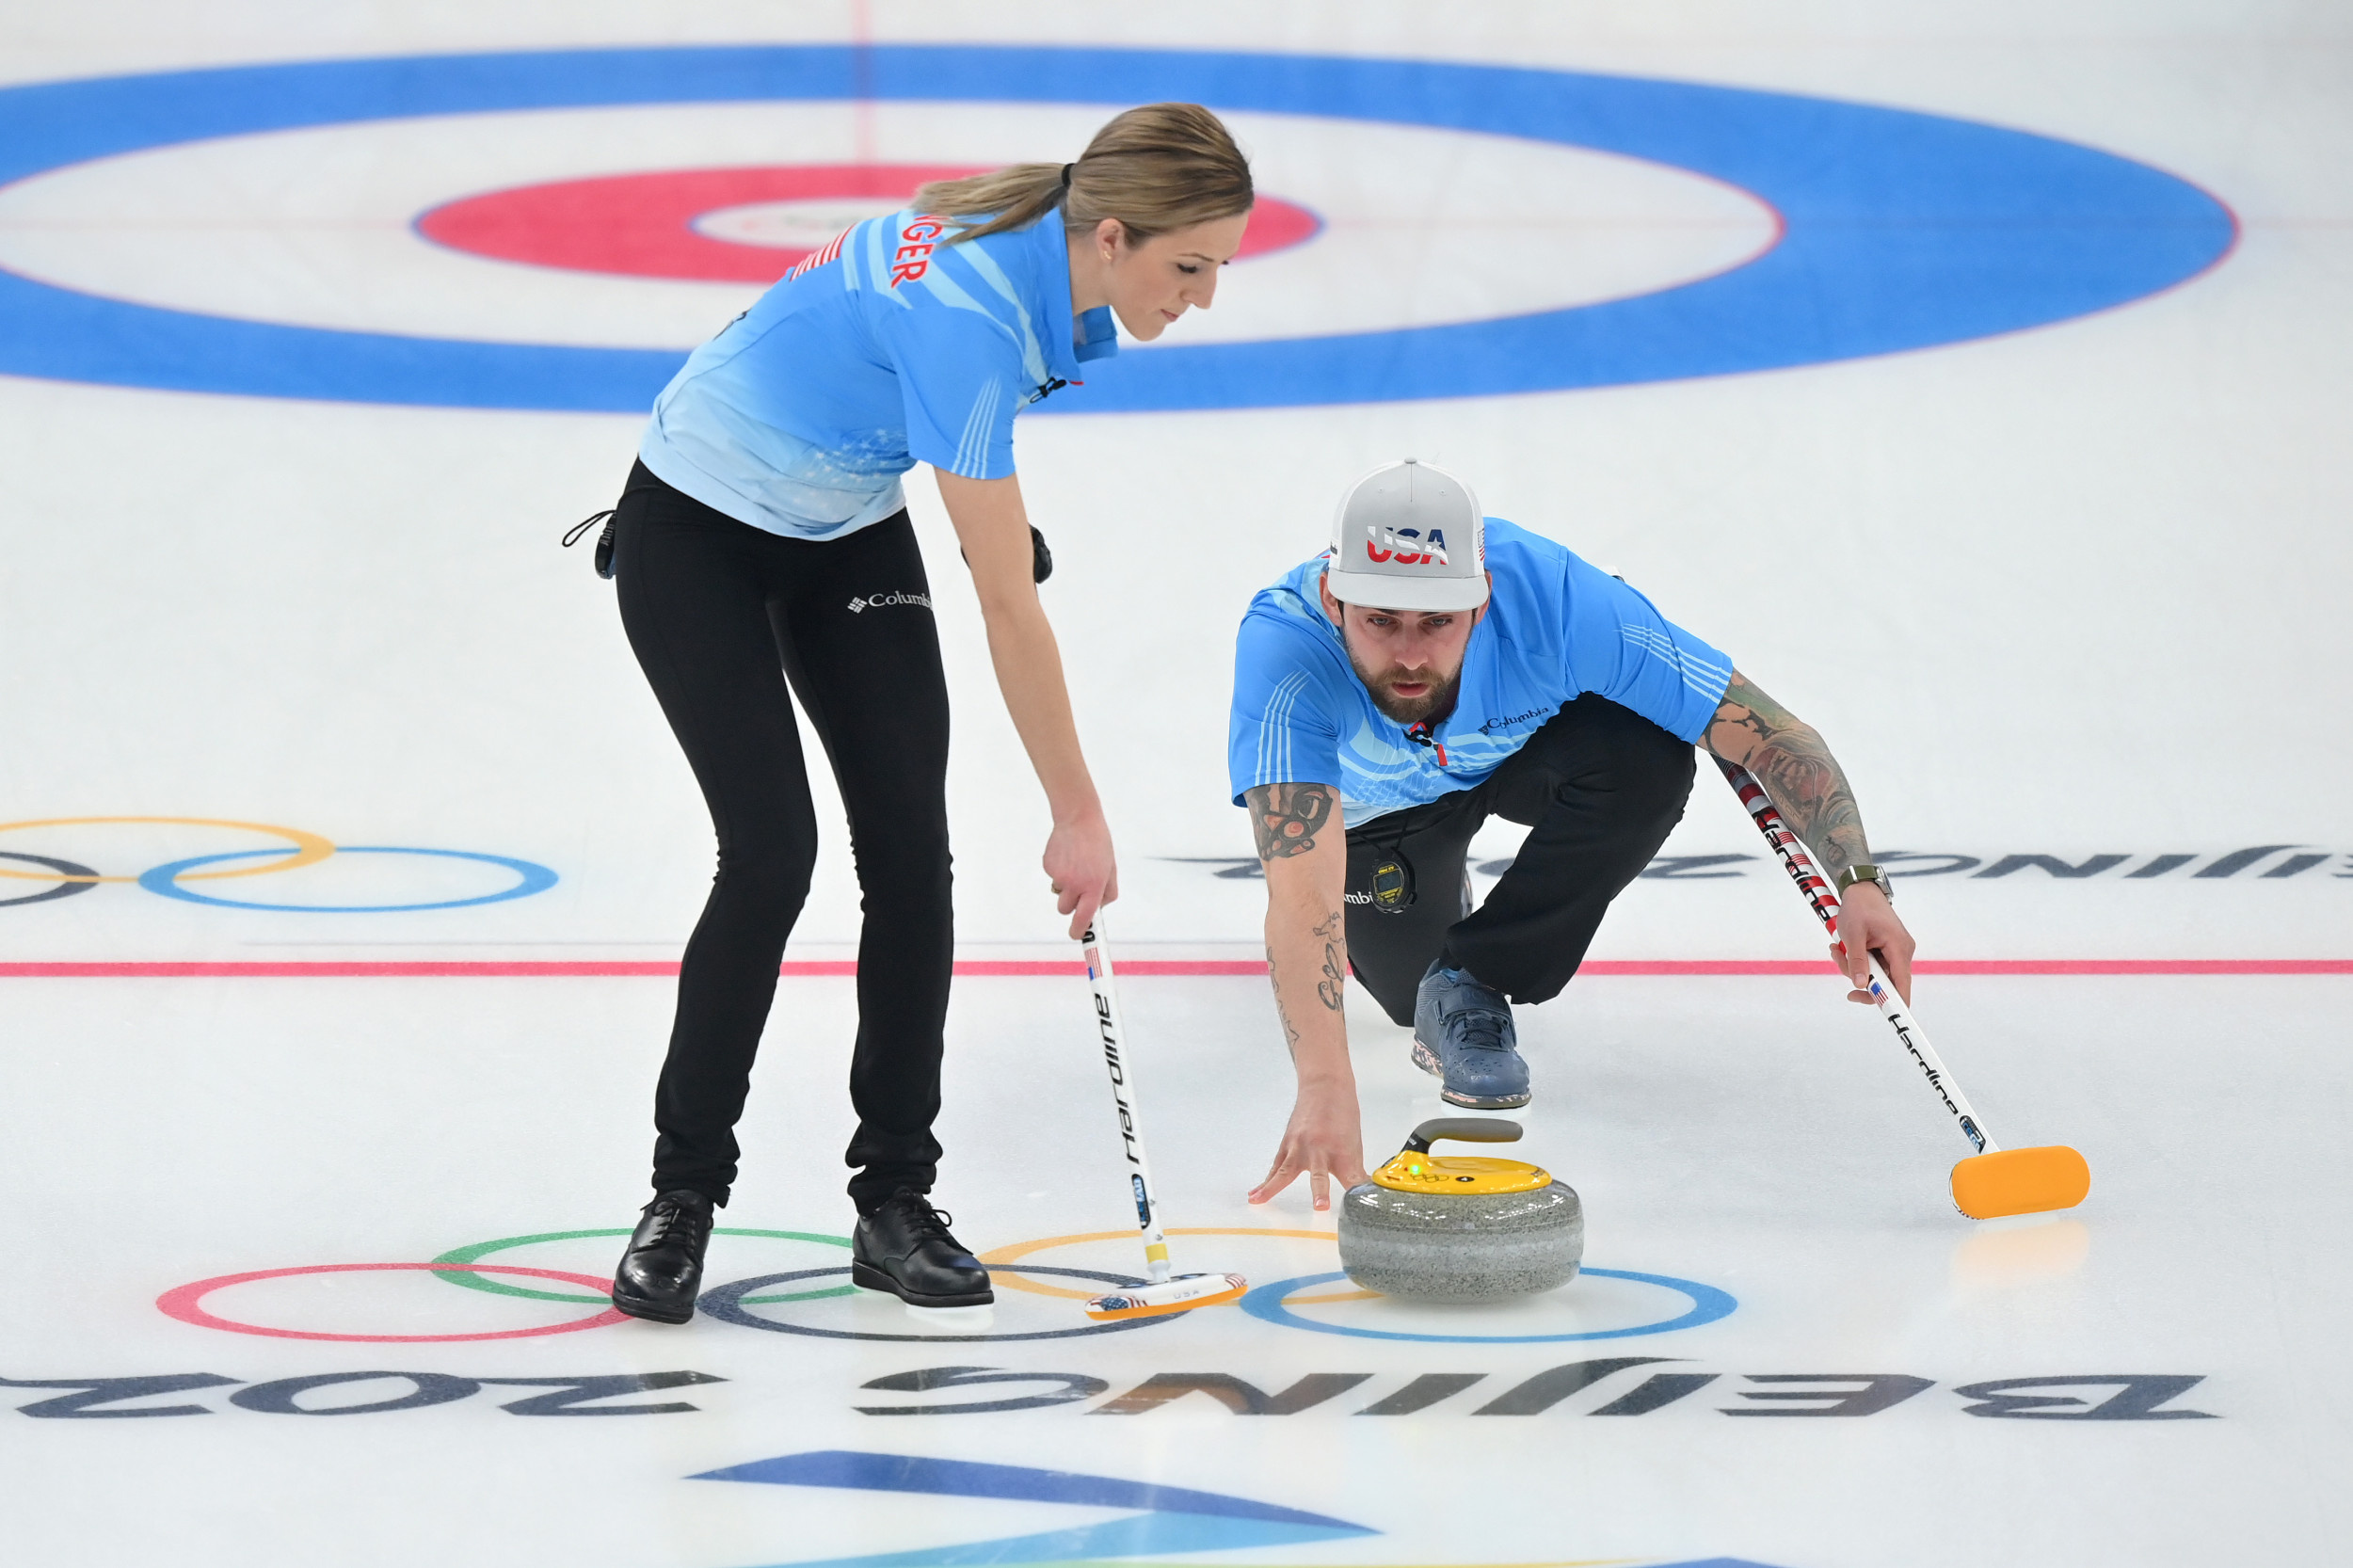 Curling: Vicky Persinger, Chris Plys, An American team, The 2022 Winter Olympics – Mixed doubles tournament. 2500x1670 HD Background.